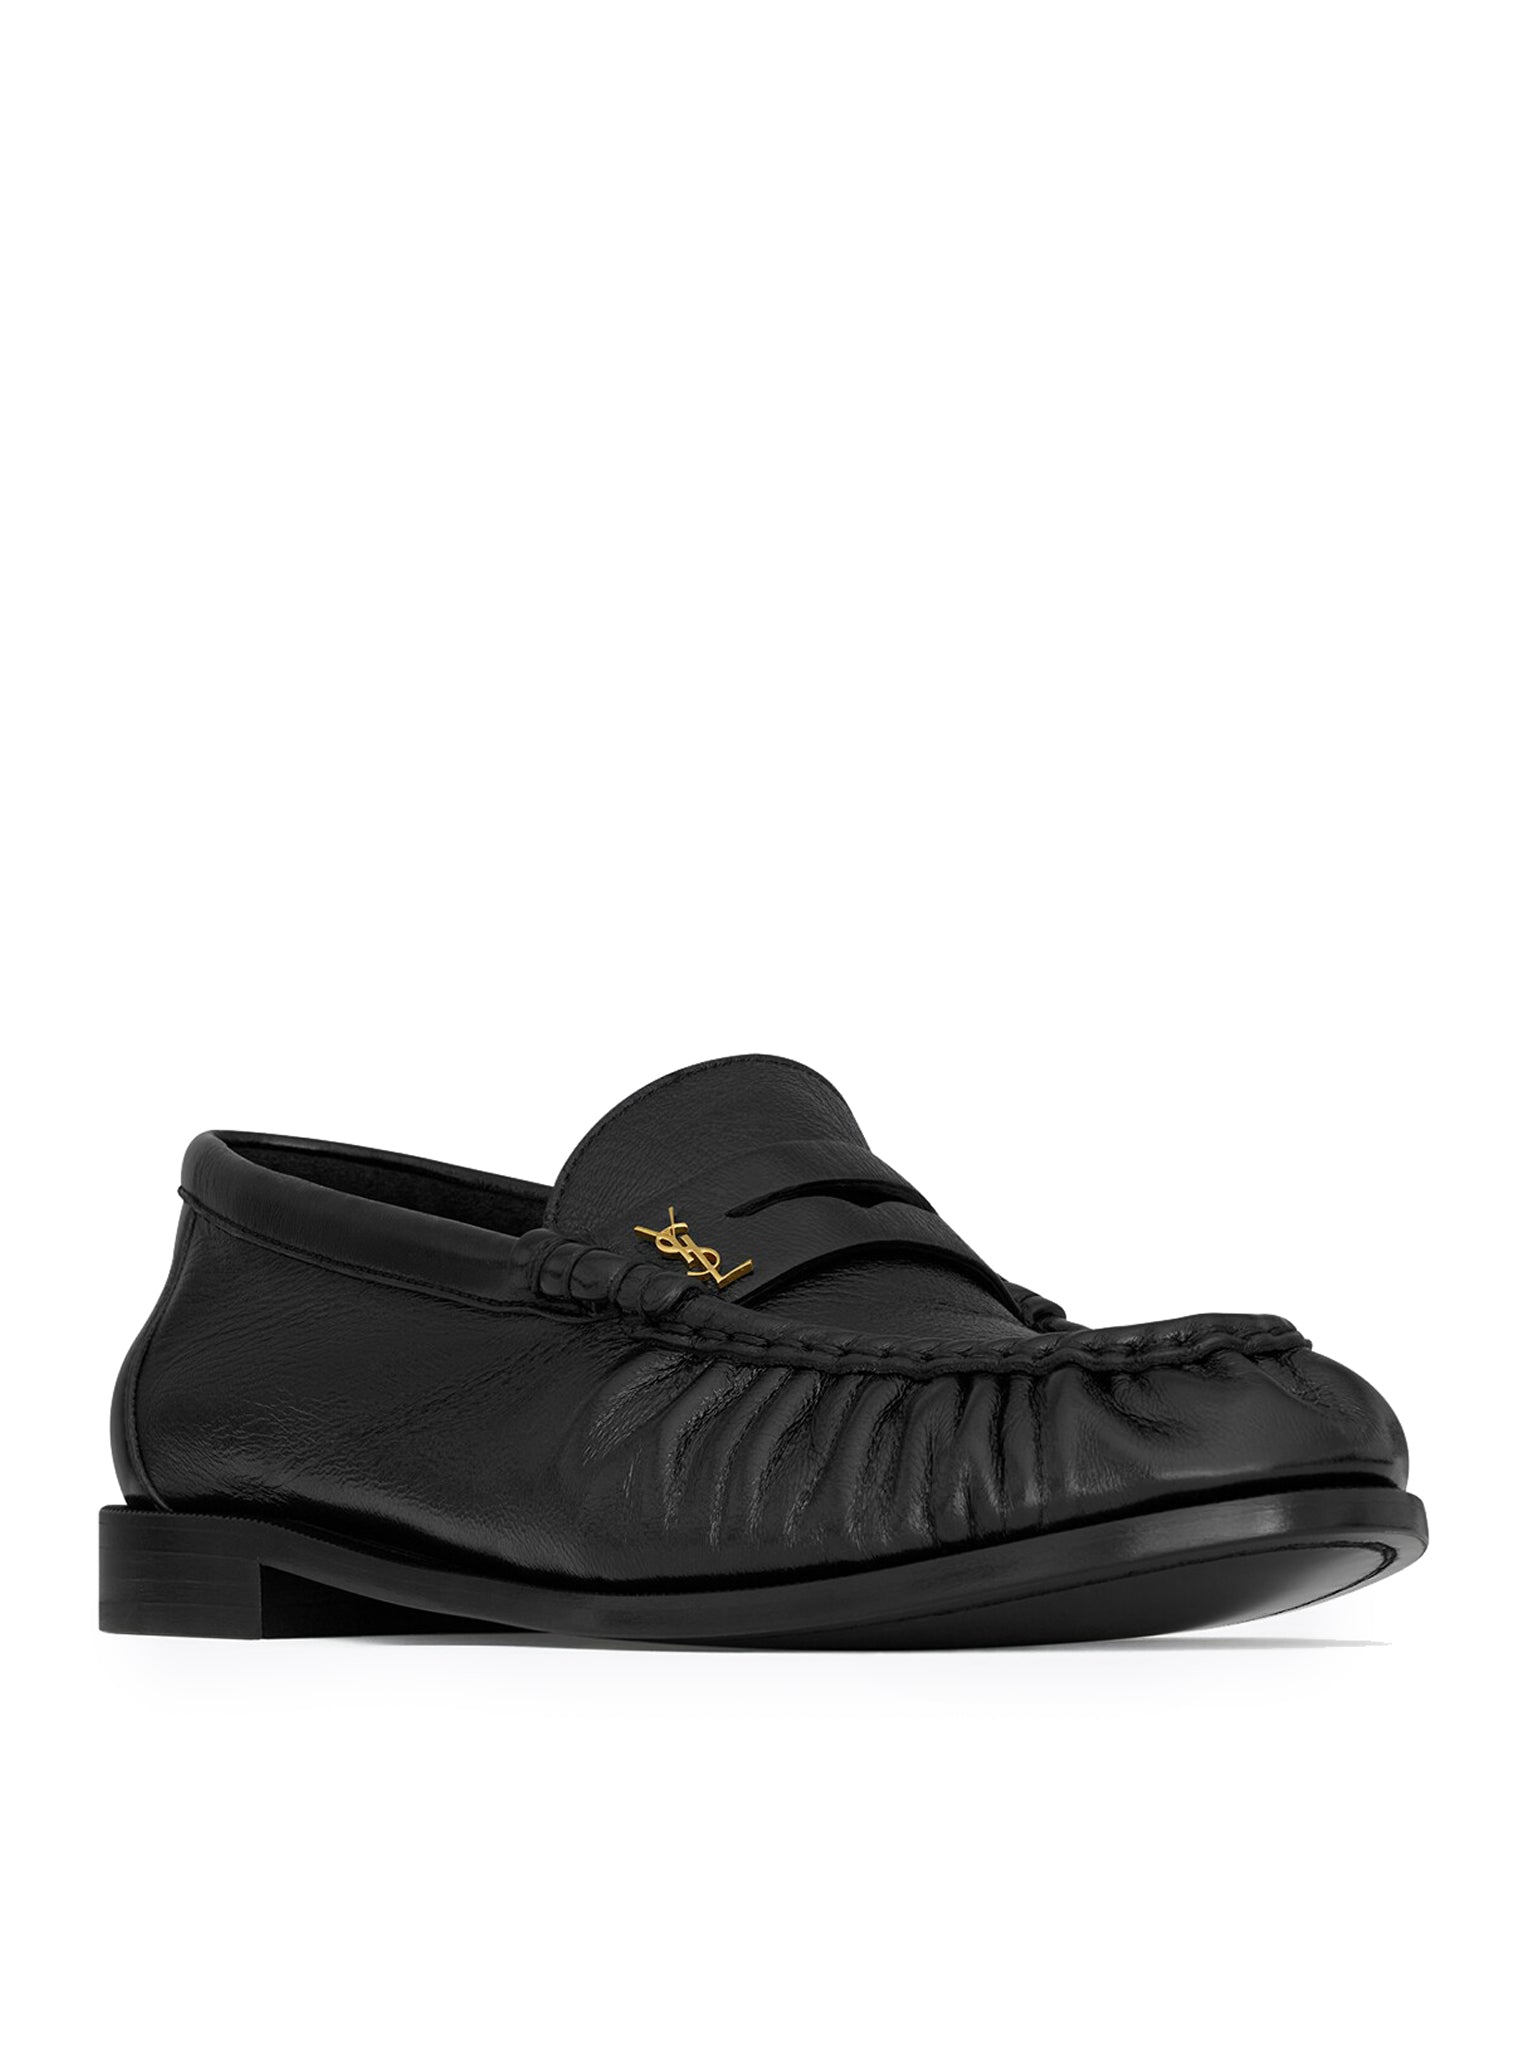 LE LOAFER LOAFERS IN POLISHED WRINKLED LEATHER